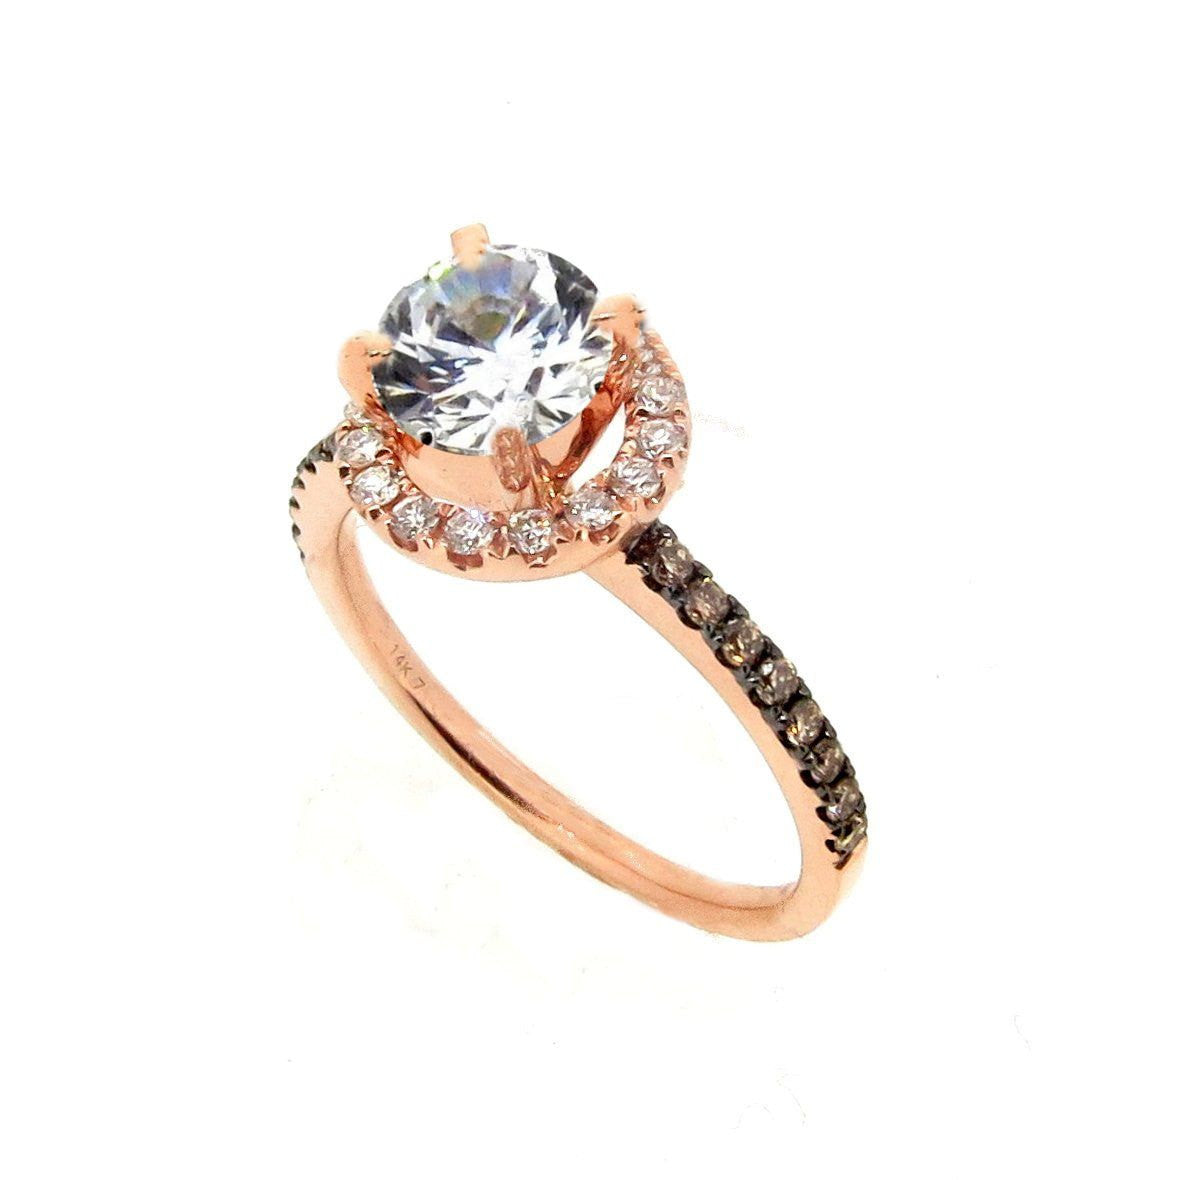 1 Carat Forever One Moissanite & .32 Carat Diamonds Halo Ring, Fancy Brown Diamonds Accent Stones, Rose Gold, Unique Engagement Ring - FB94639A